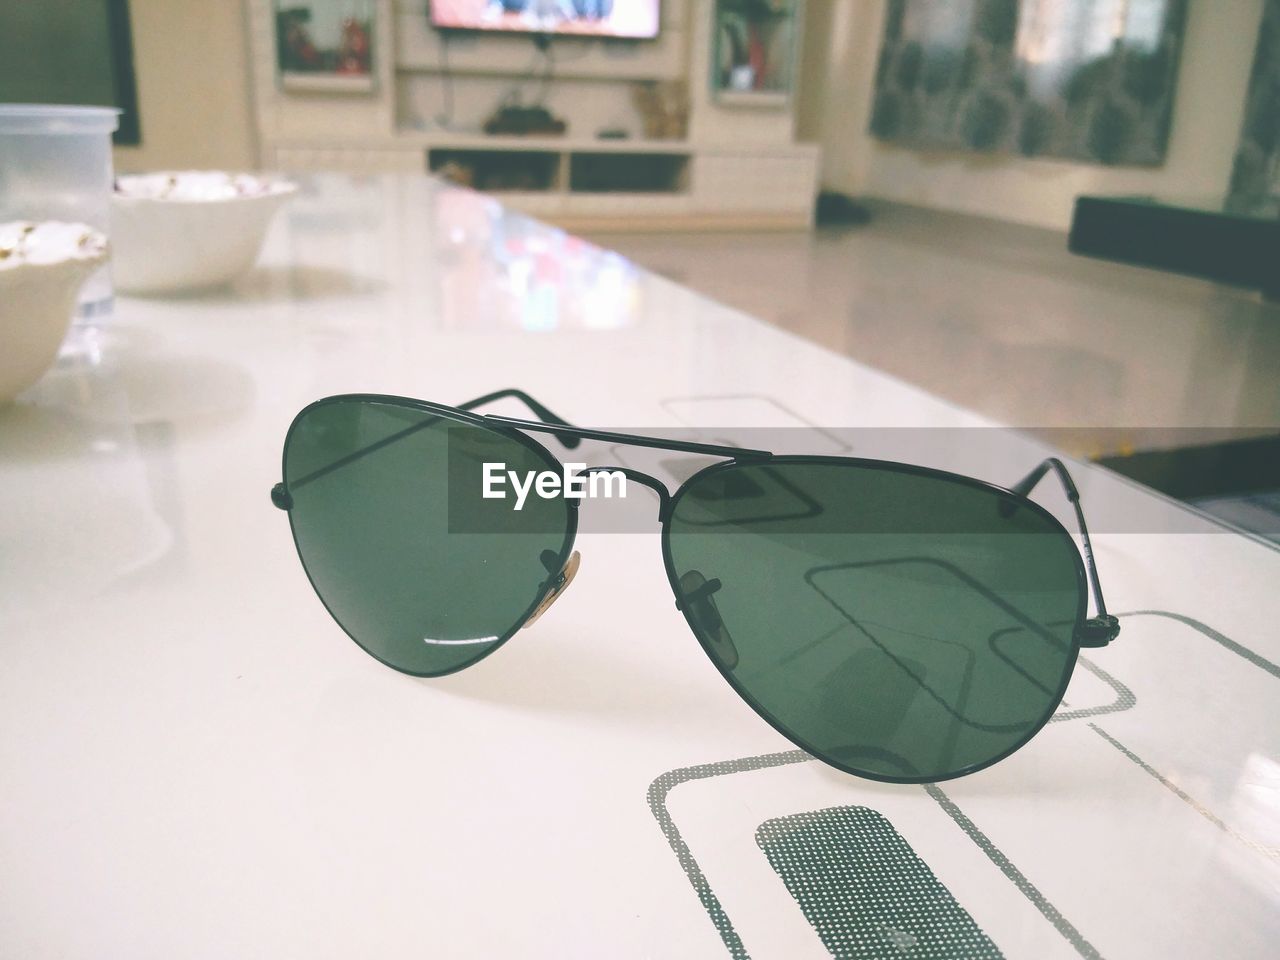 CLOSE-UP OF SUNGLASSES ON TABLE IN MIRROR